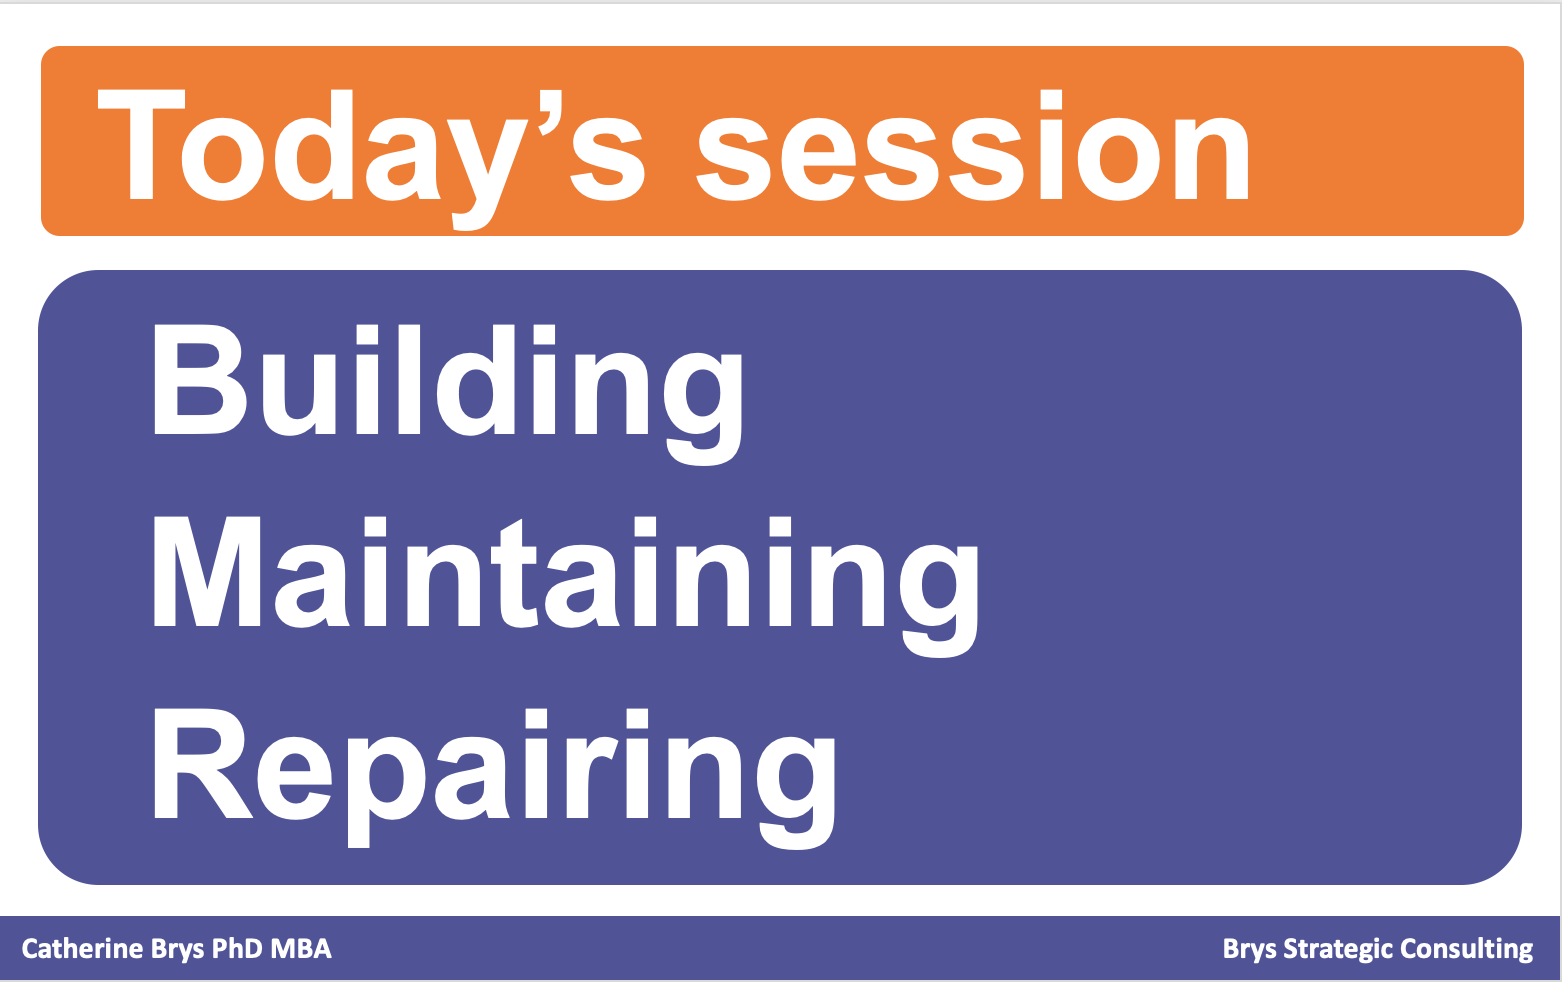 Outline of the webinar: Building, Maintaining, Repairing